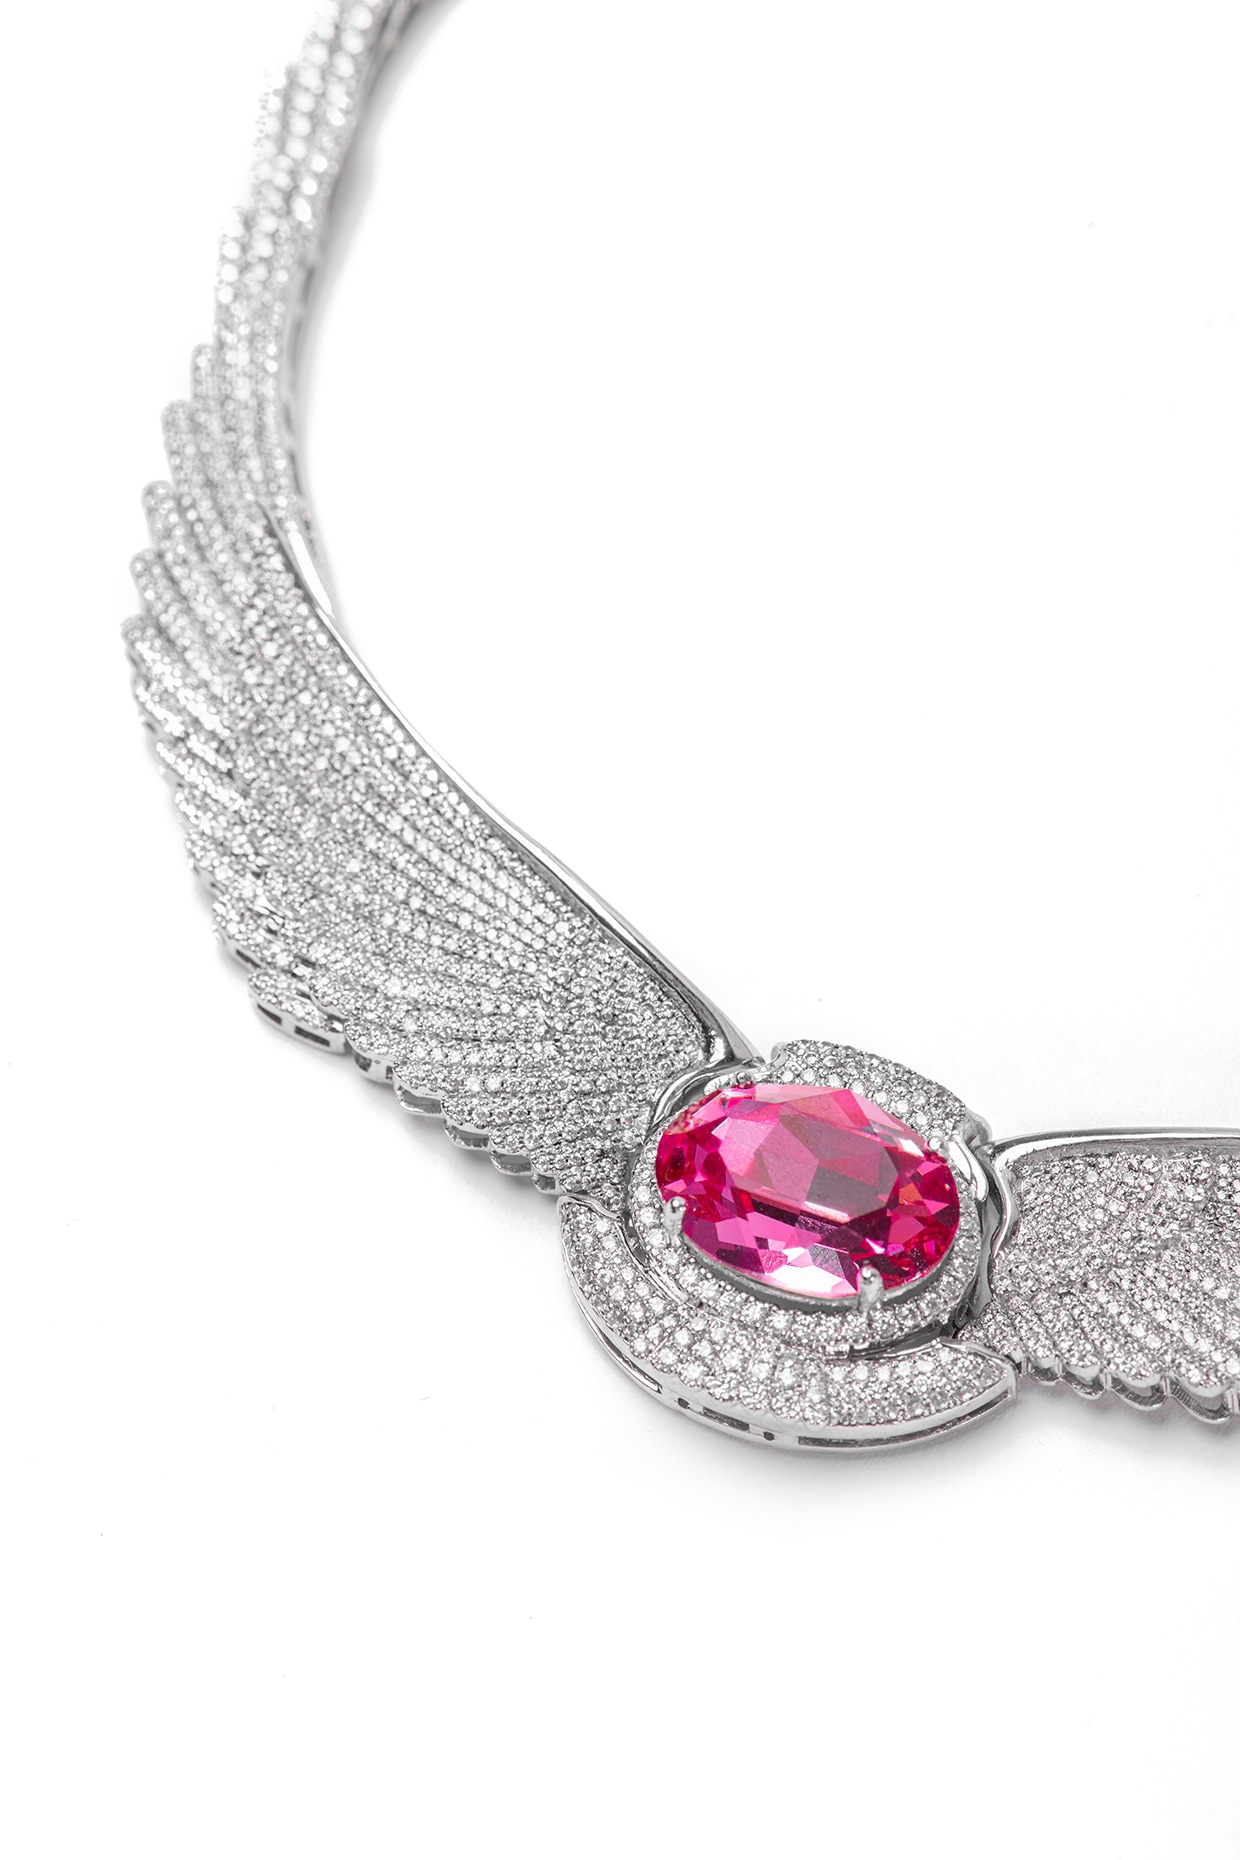 Swarovski Bella V Pendant Necklace | Rose Gold-Tone Plated | Pink Crystal  5662088 - First Class Watches™ IRL